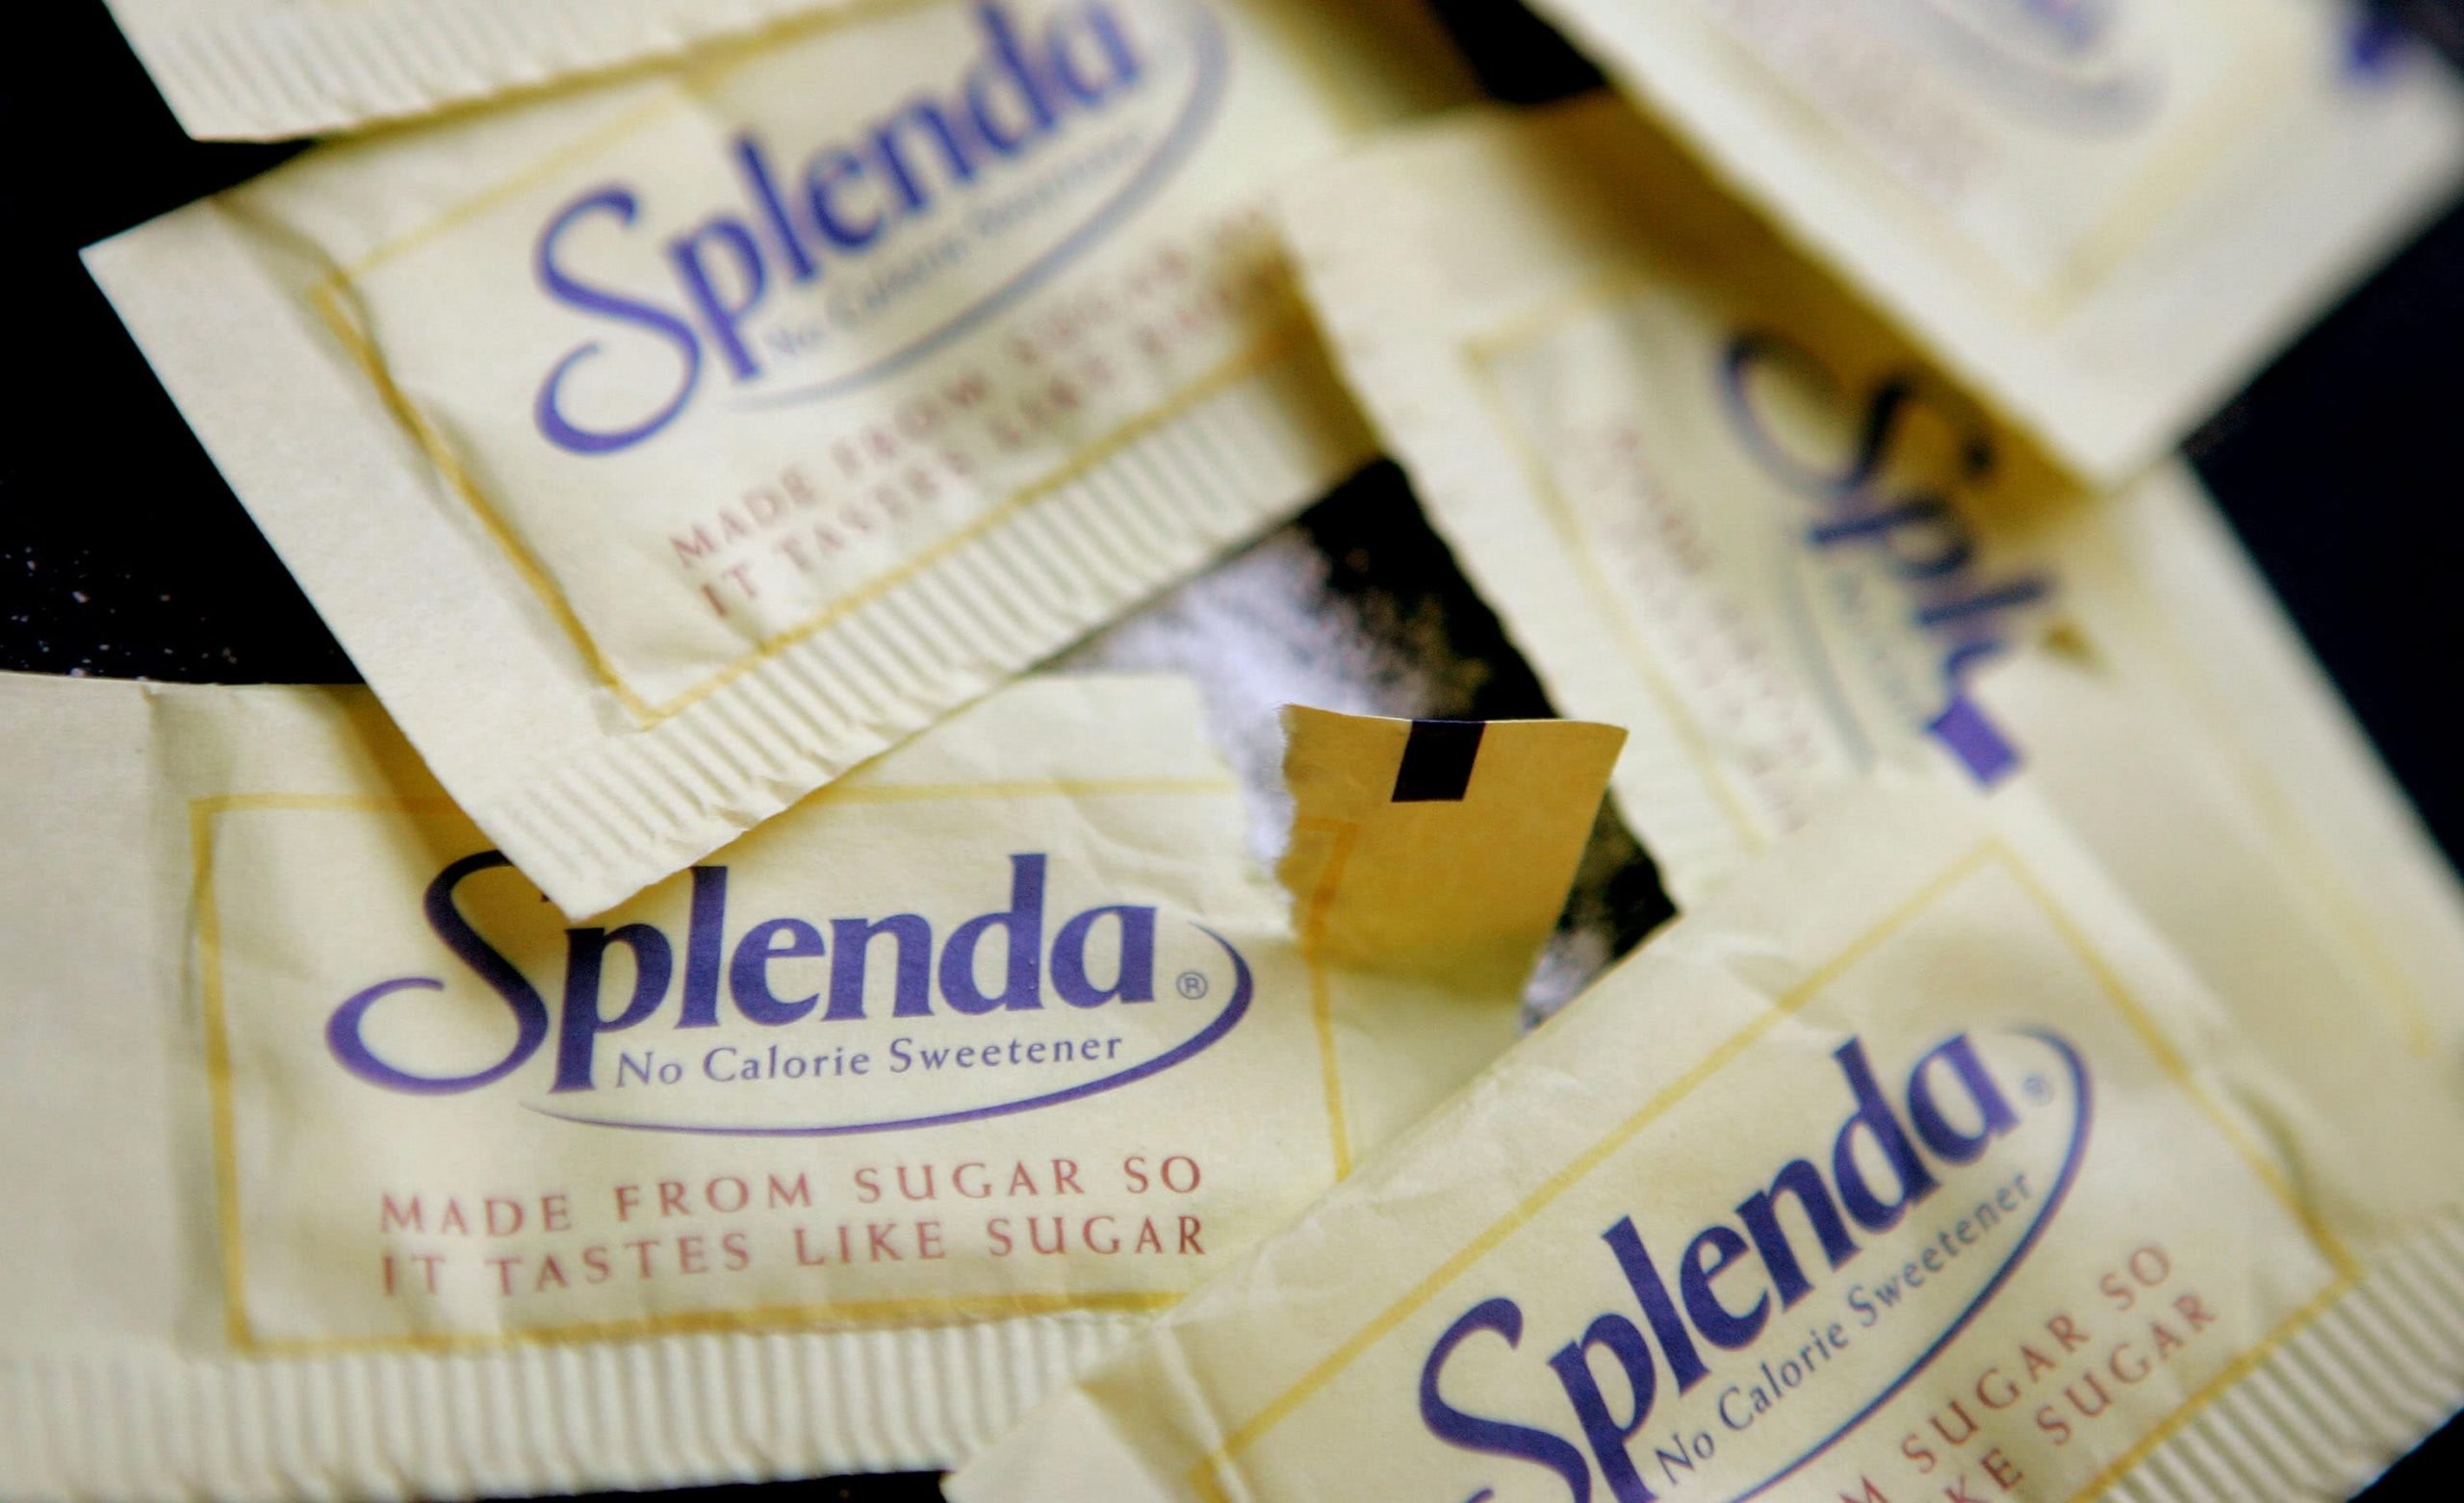 Artificial sweeteners could cause spikes in blood sugar